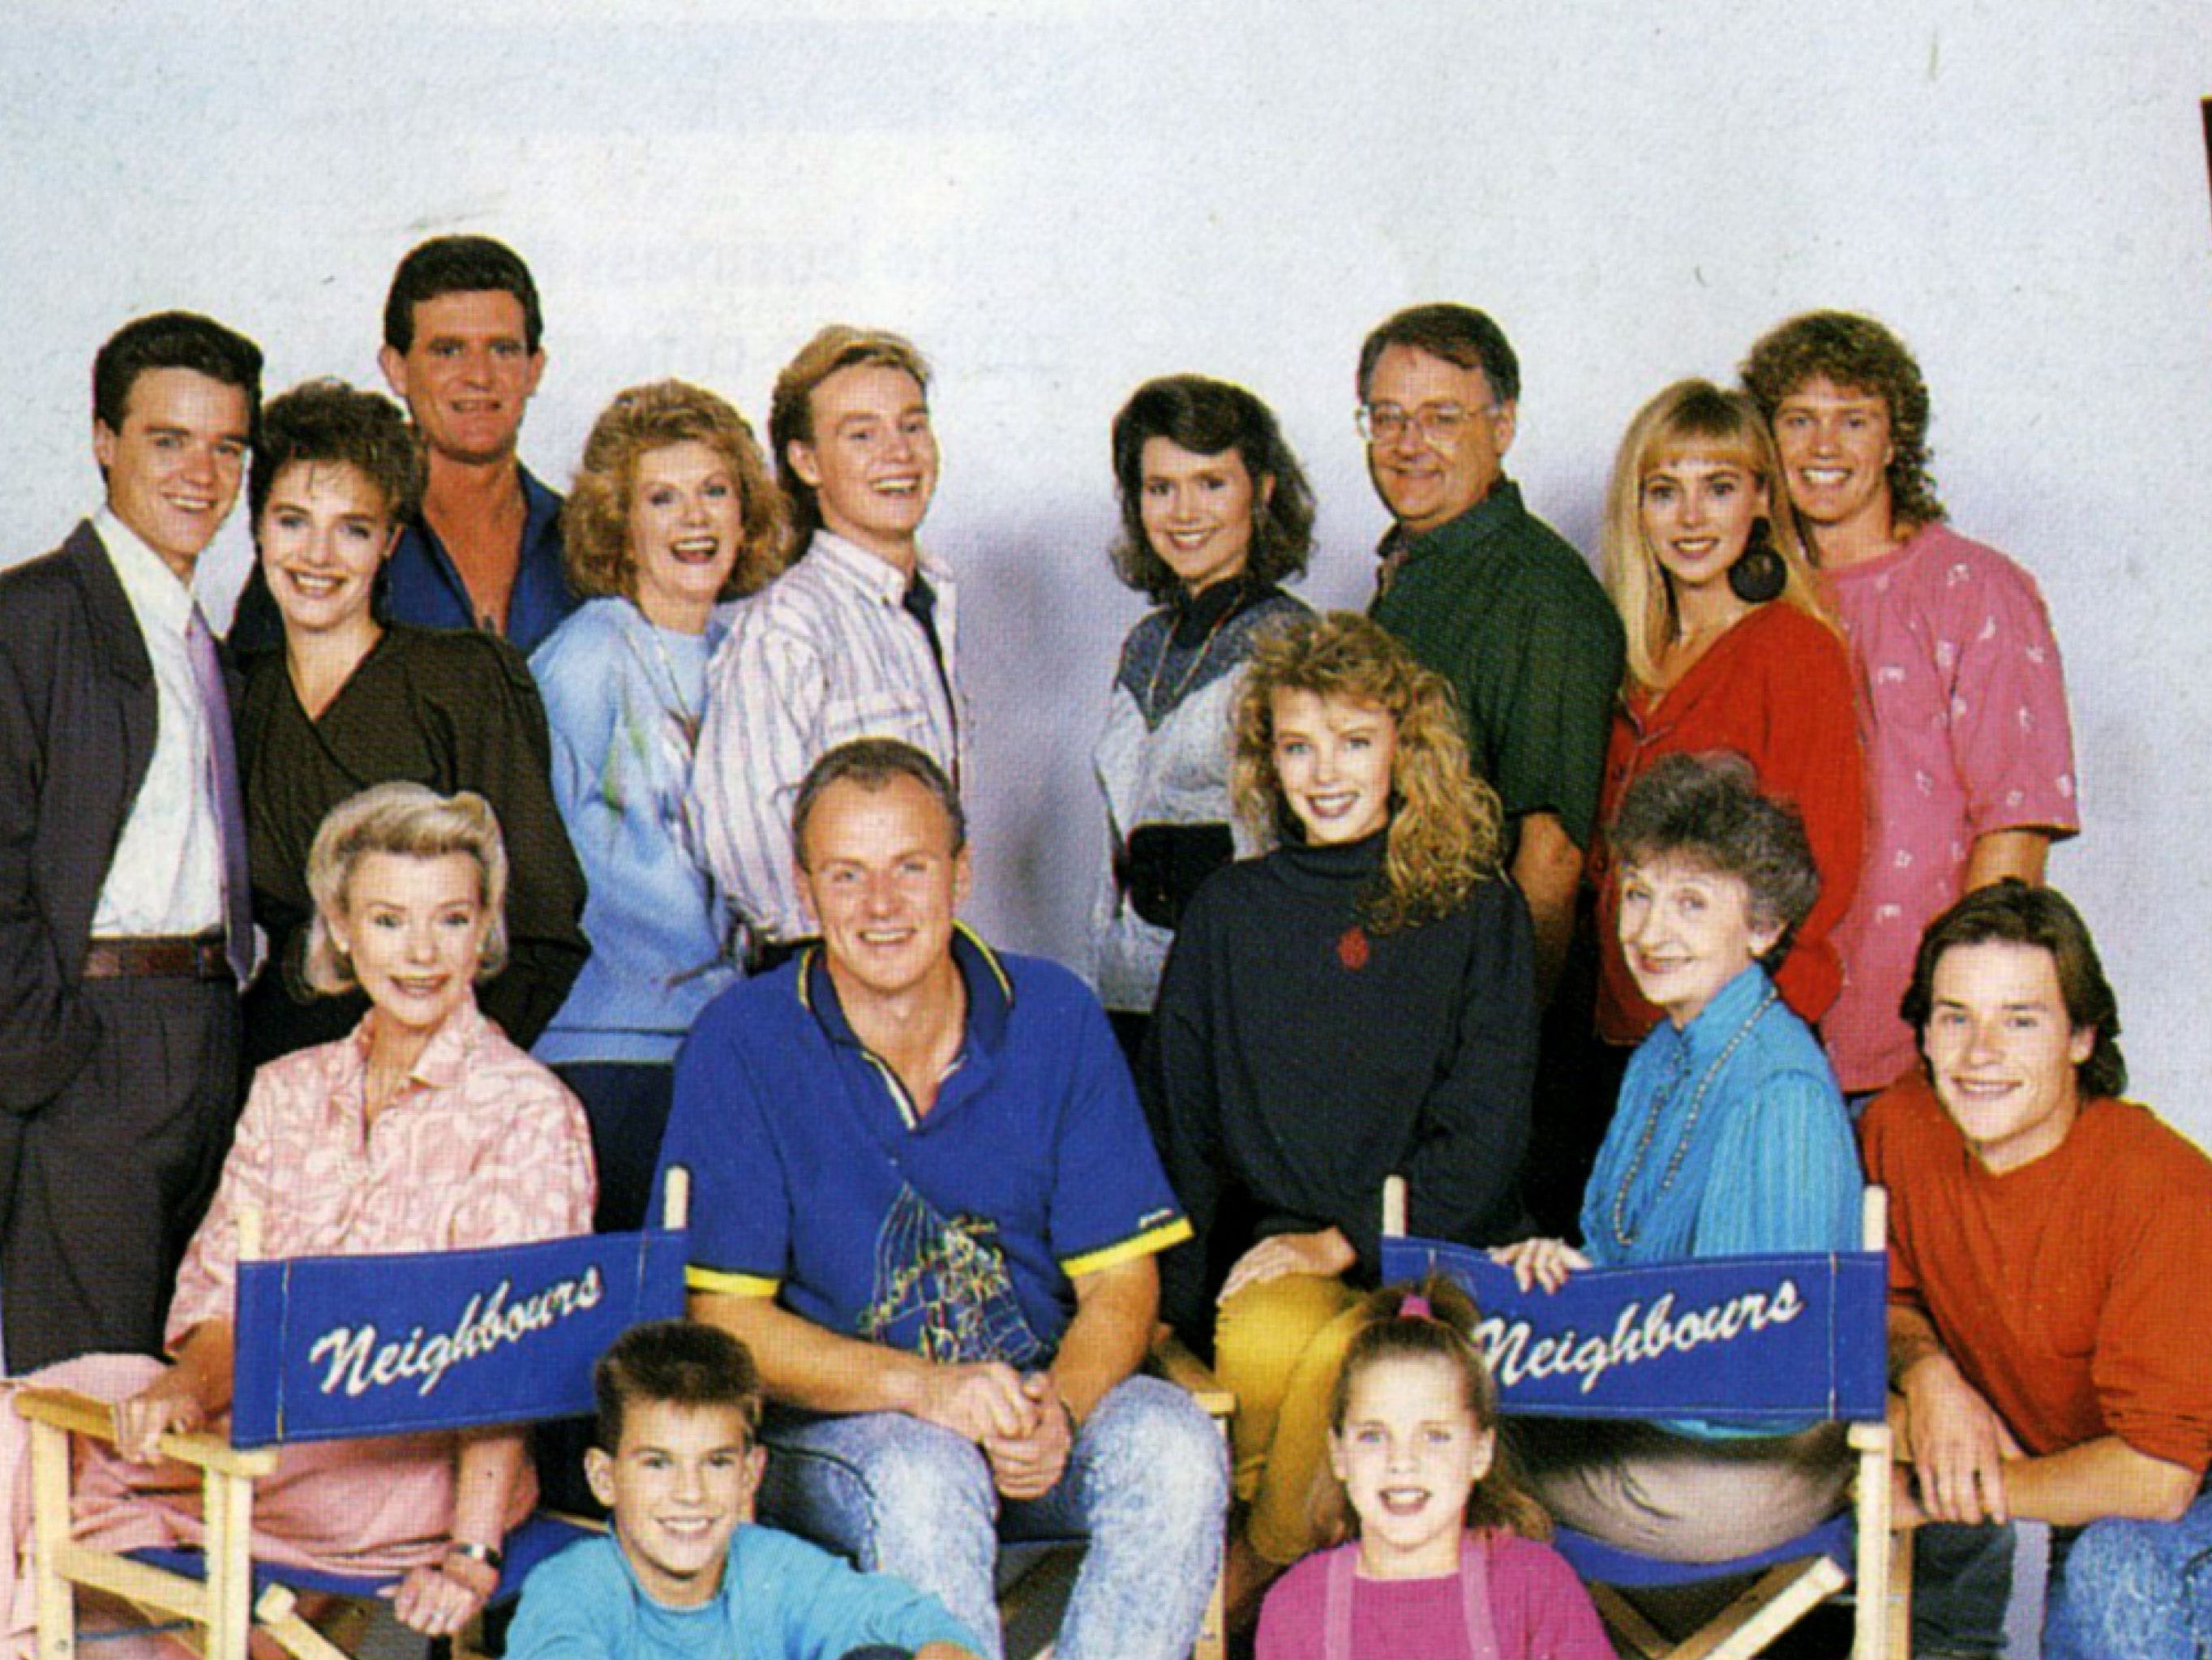 The original cast of ‘Neighbours’, which is being dropped in the UK after 36 years